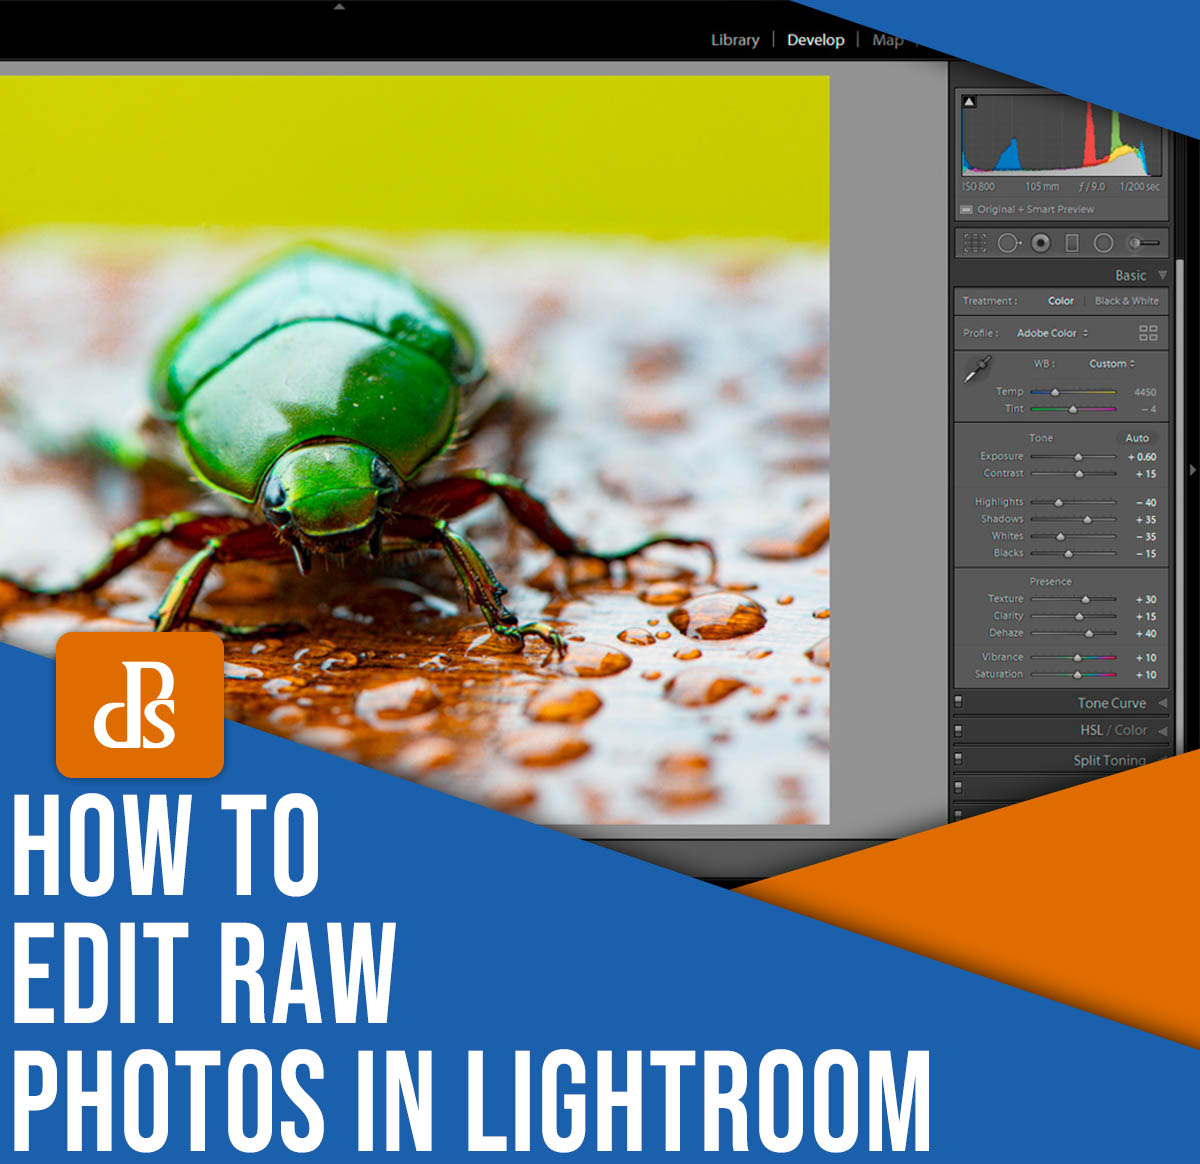 How to edit RAW photos in Lightroom